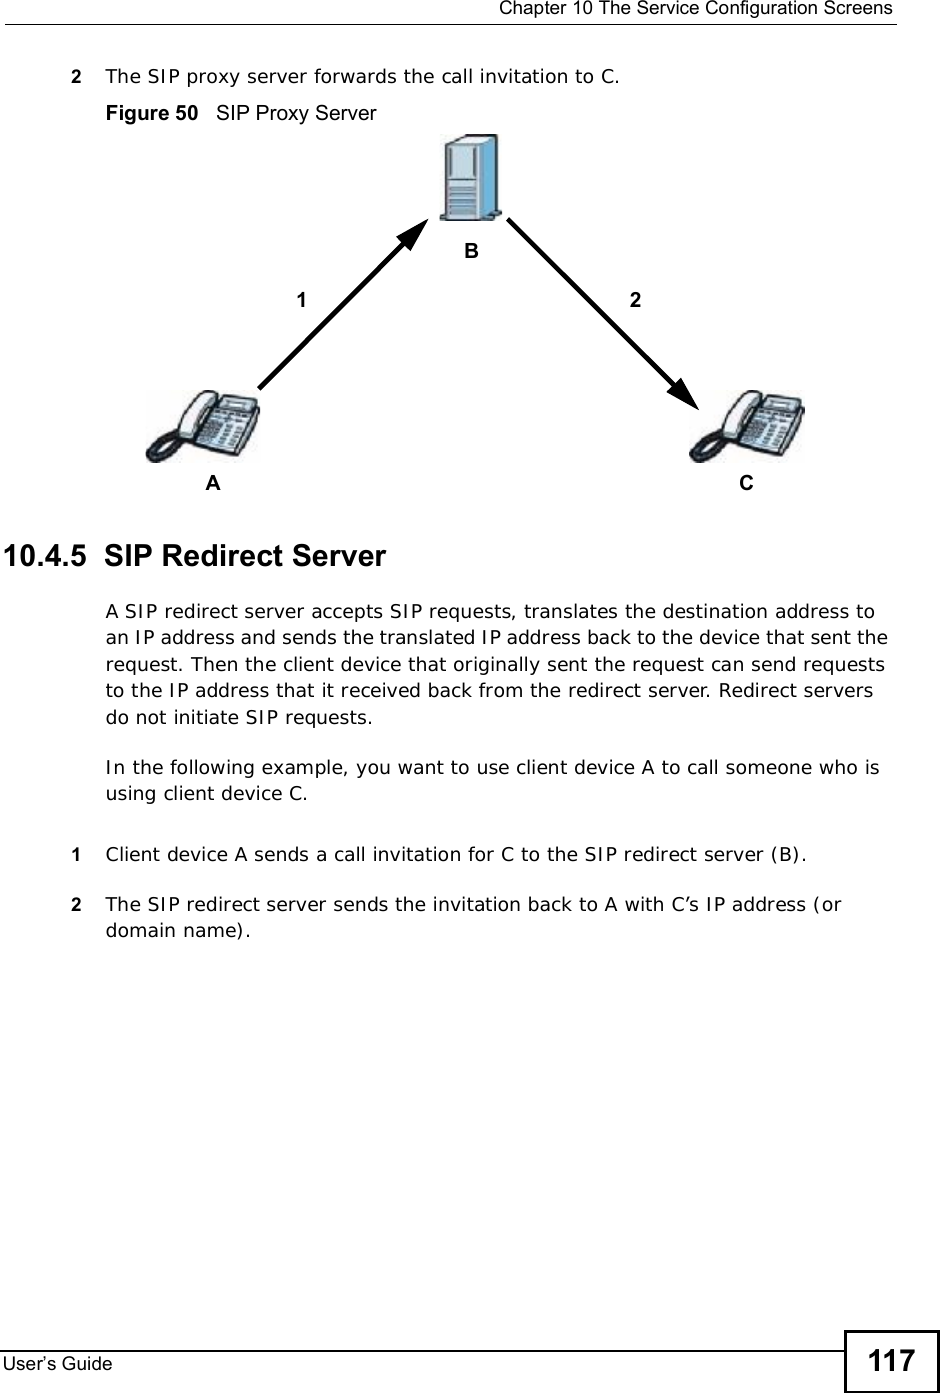  Chapter 10The Service Configuration ScreensUser s Guide 1172The SIP proxy server forwards the call invitation to C.Figure 50   SIP Proxy Server10.4.5  SIP Redirect ServerA SIP redirect server accepts SIP requests, translates the destination address to an IP address and sends the translated IP address back to the device that sent the request. Then the client device that originally sent the request can send requests to the IP address that it received back from the redirect server. Redirect servers do not initiate SIP requests. In the following example, you want to use client device A to call someone who is using client device C. 1Client device A sends a call invitation for C to the SIP redirect server (B).2The SIP redirect server sends the invitation back to A with C’s IP address (or domain name).ACB12